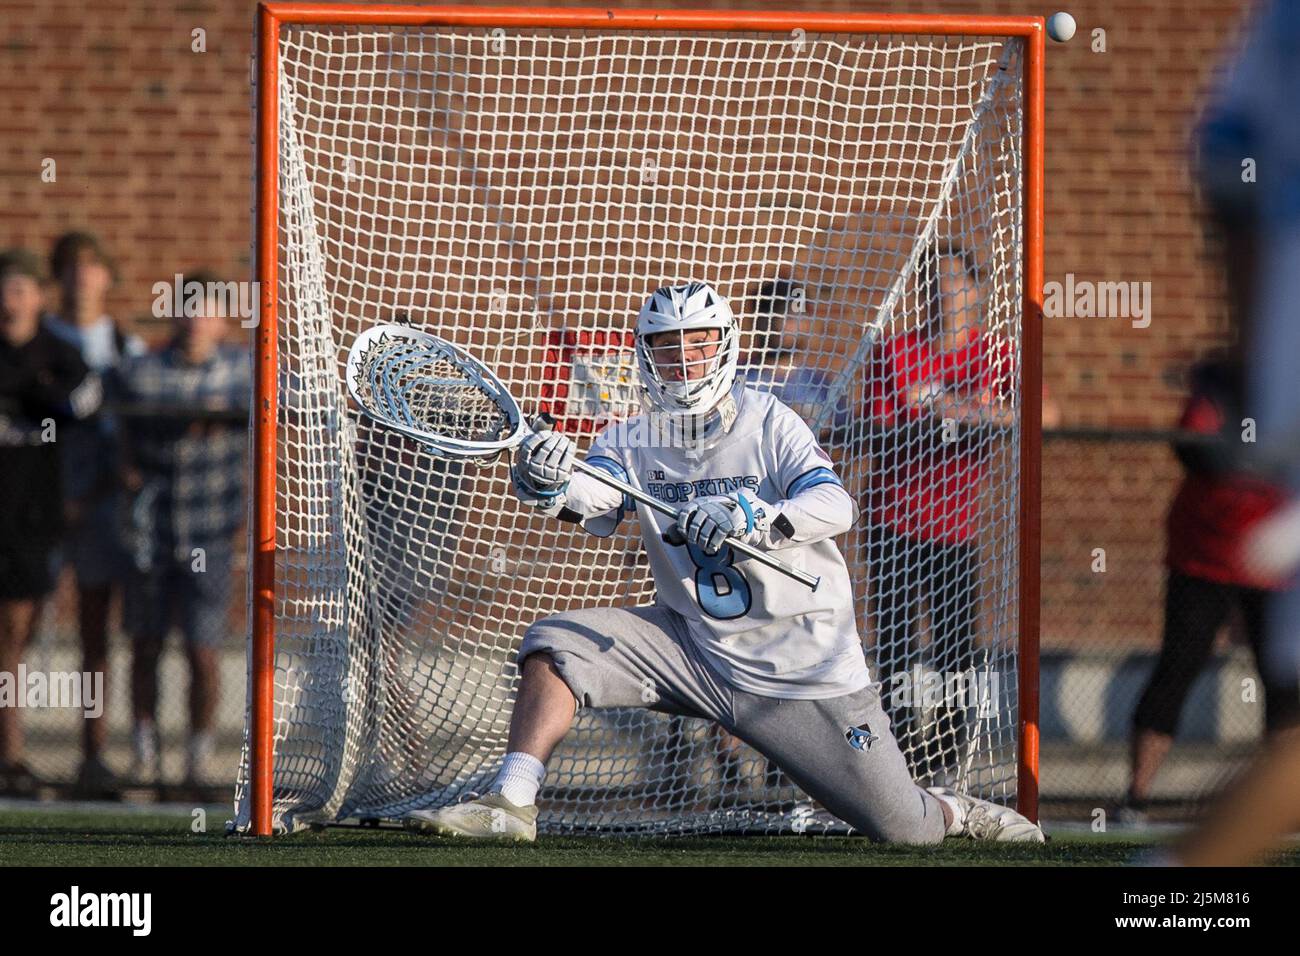 April 23, 2022: Johns Hopkins goalie Josh Kirson (8) in goal during the ncaa men's lacrosse regular season finale between the Maryland Terrapins and the Johns Hopkins Blue Jays at Homewood Field in Baltimore, Maryland Photographer: Cory Royster Stock Photo